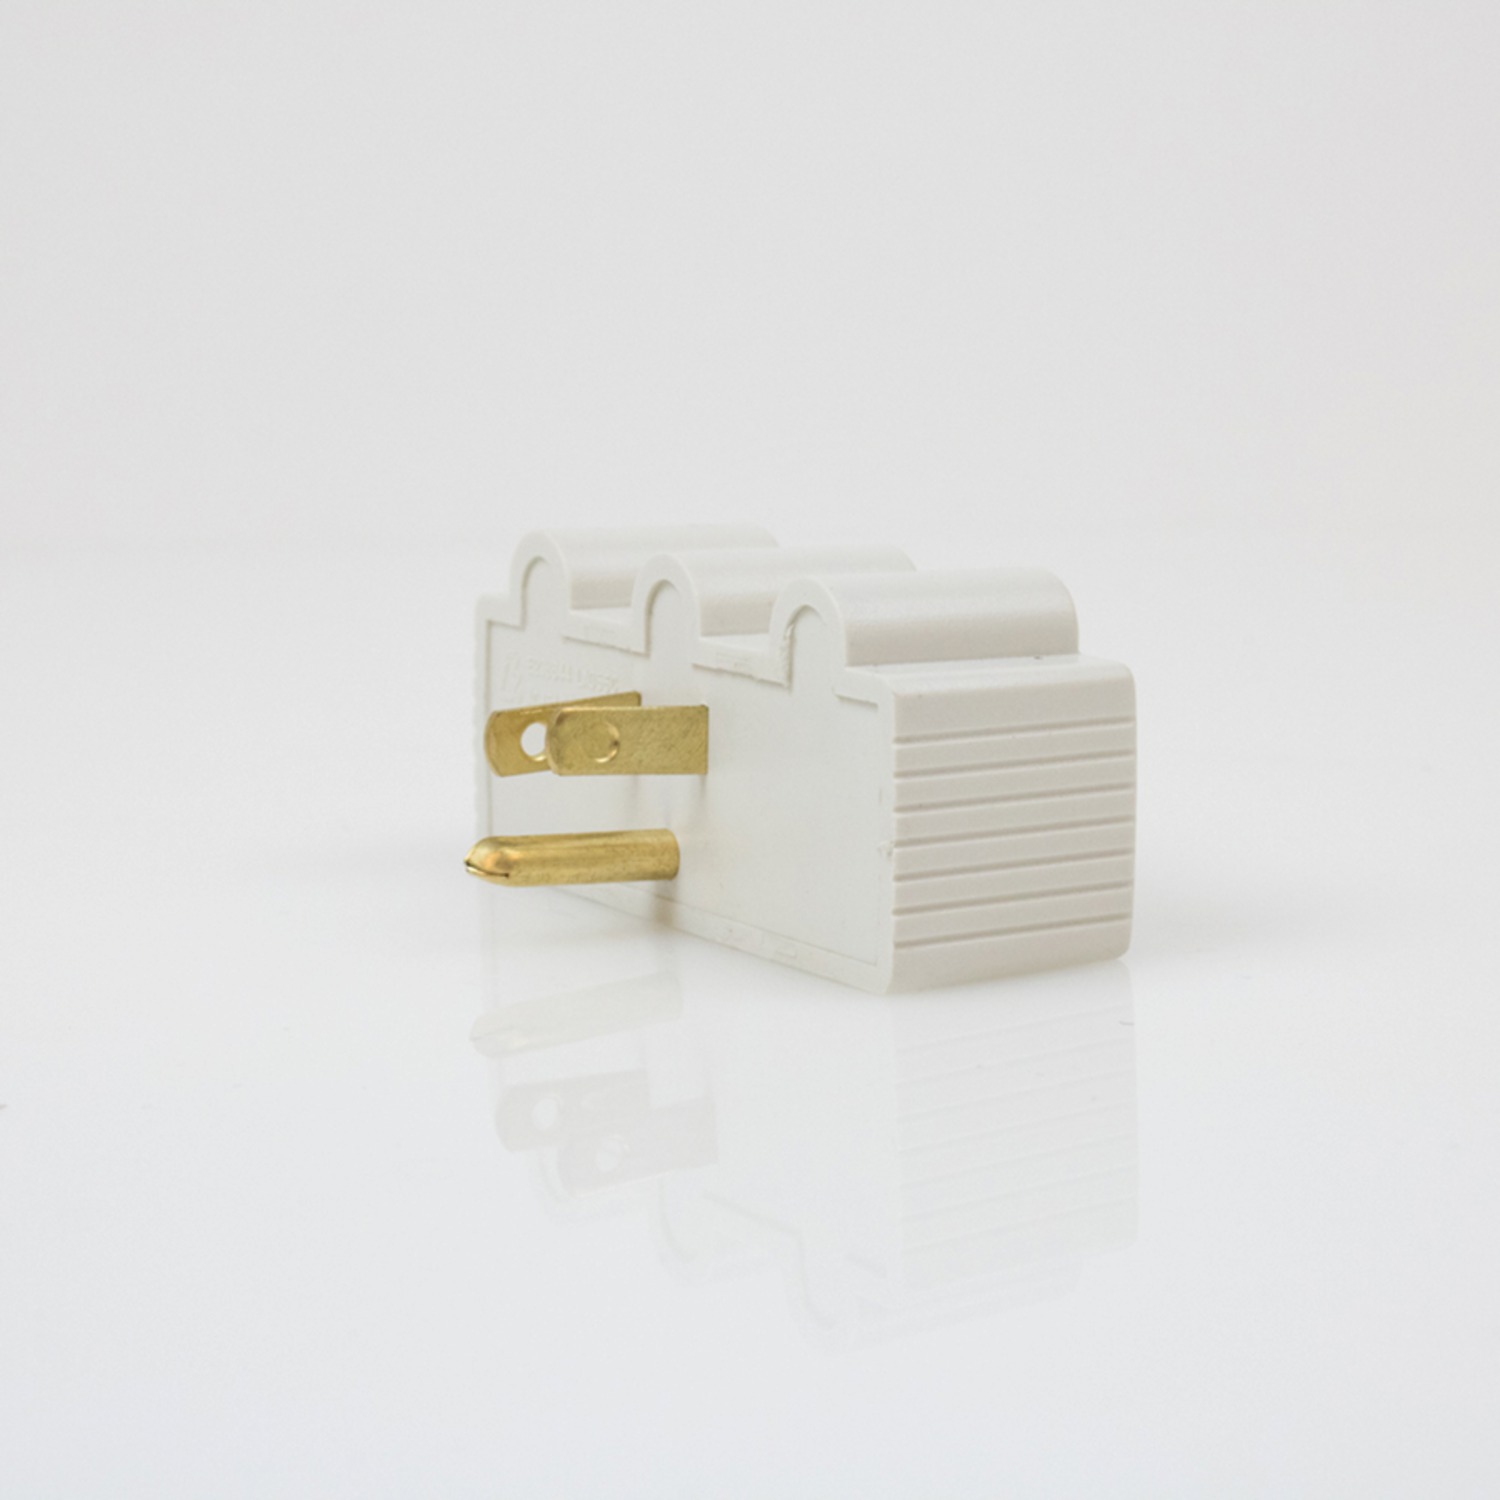 Axis 45090 3-Outlet Wall Adapter - image 3 of 14